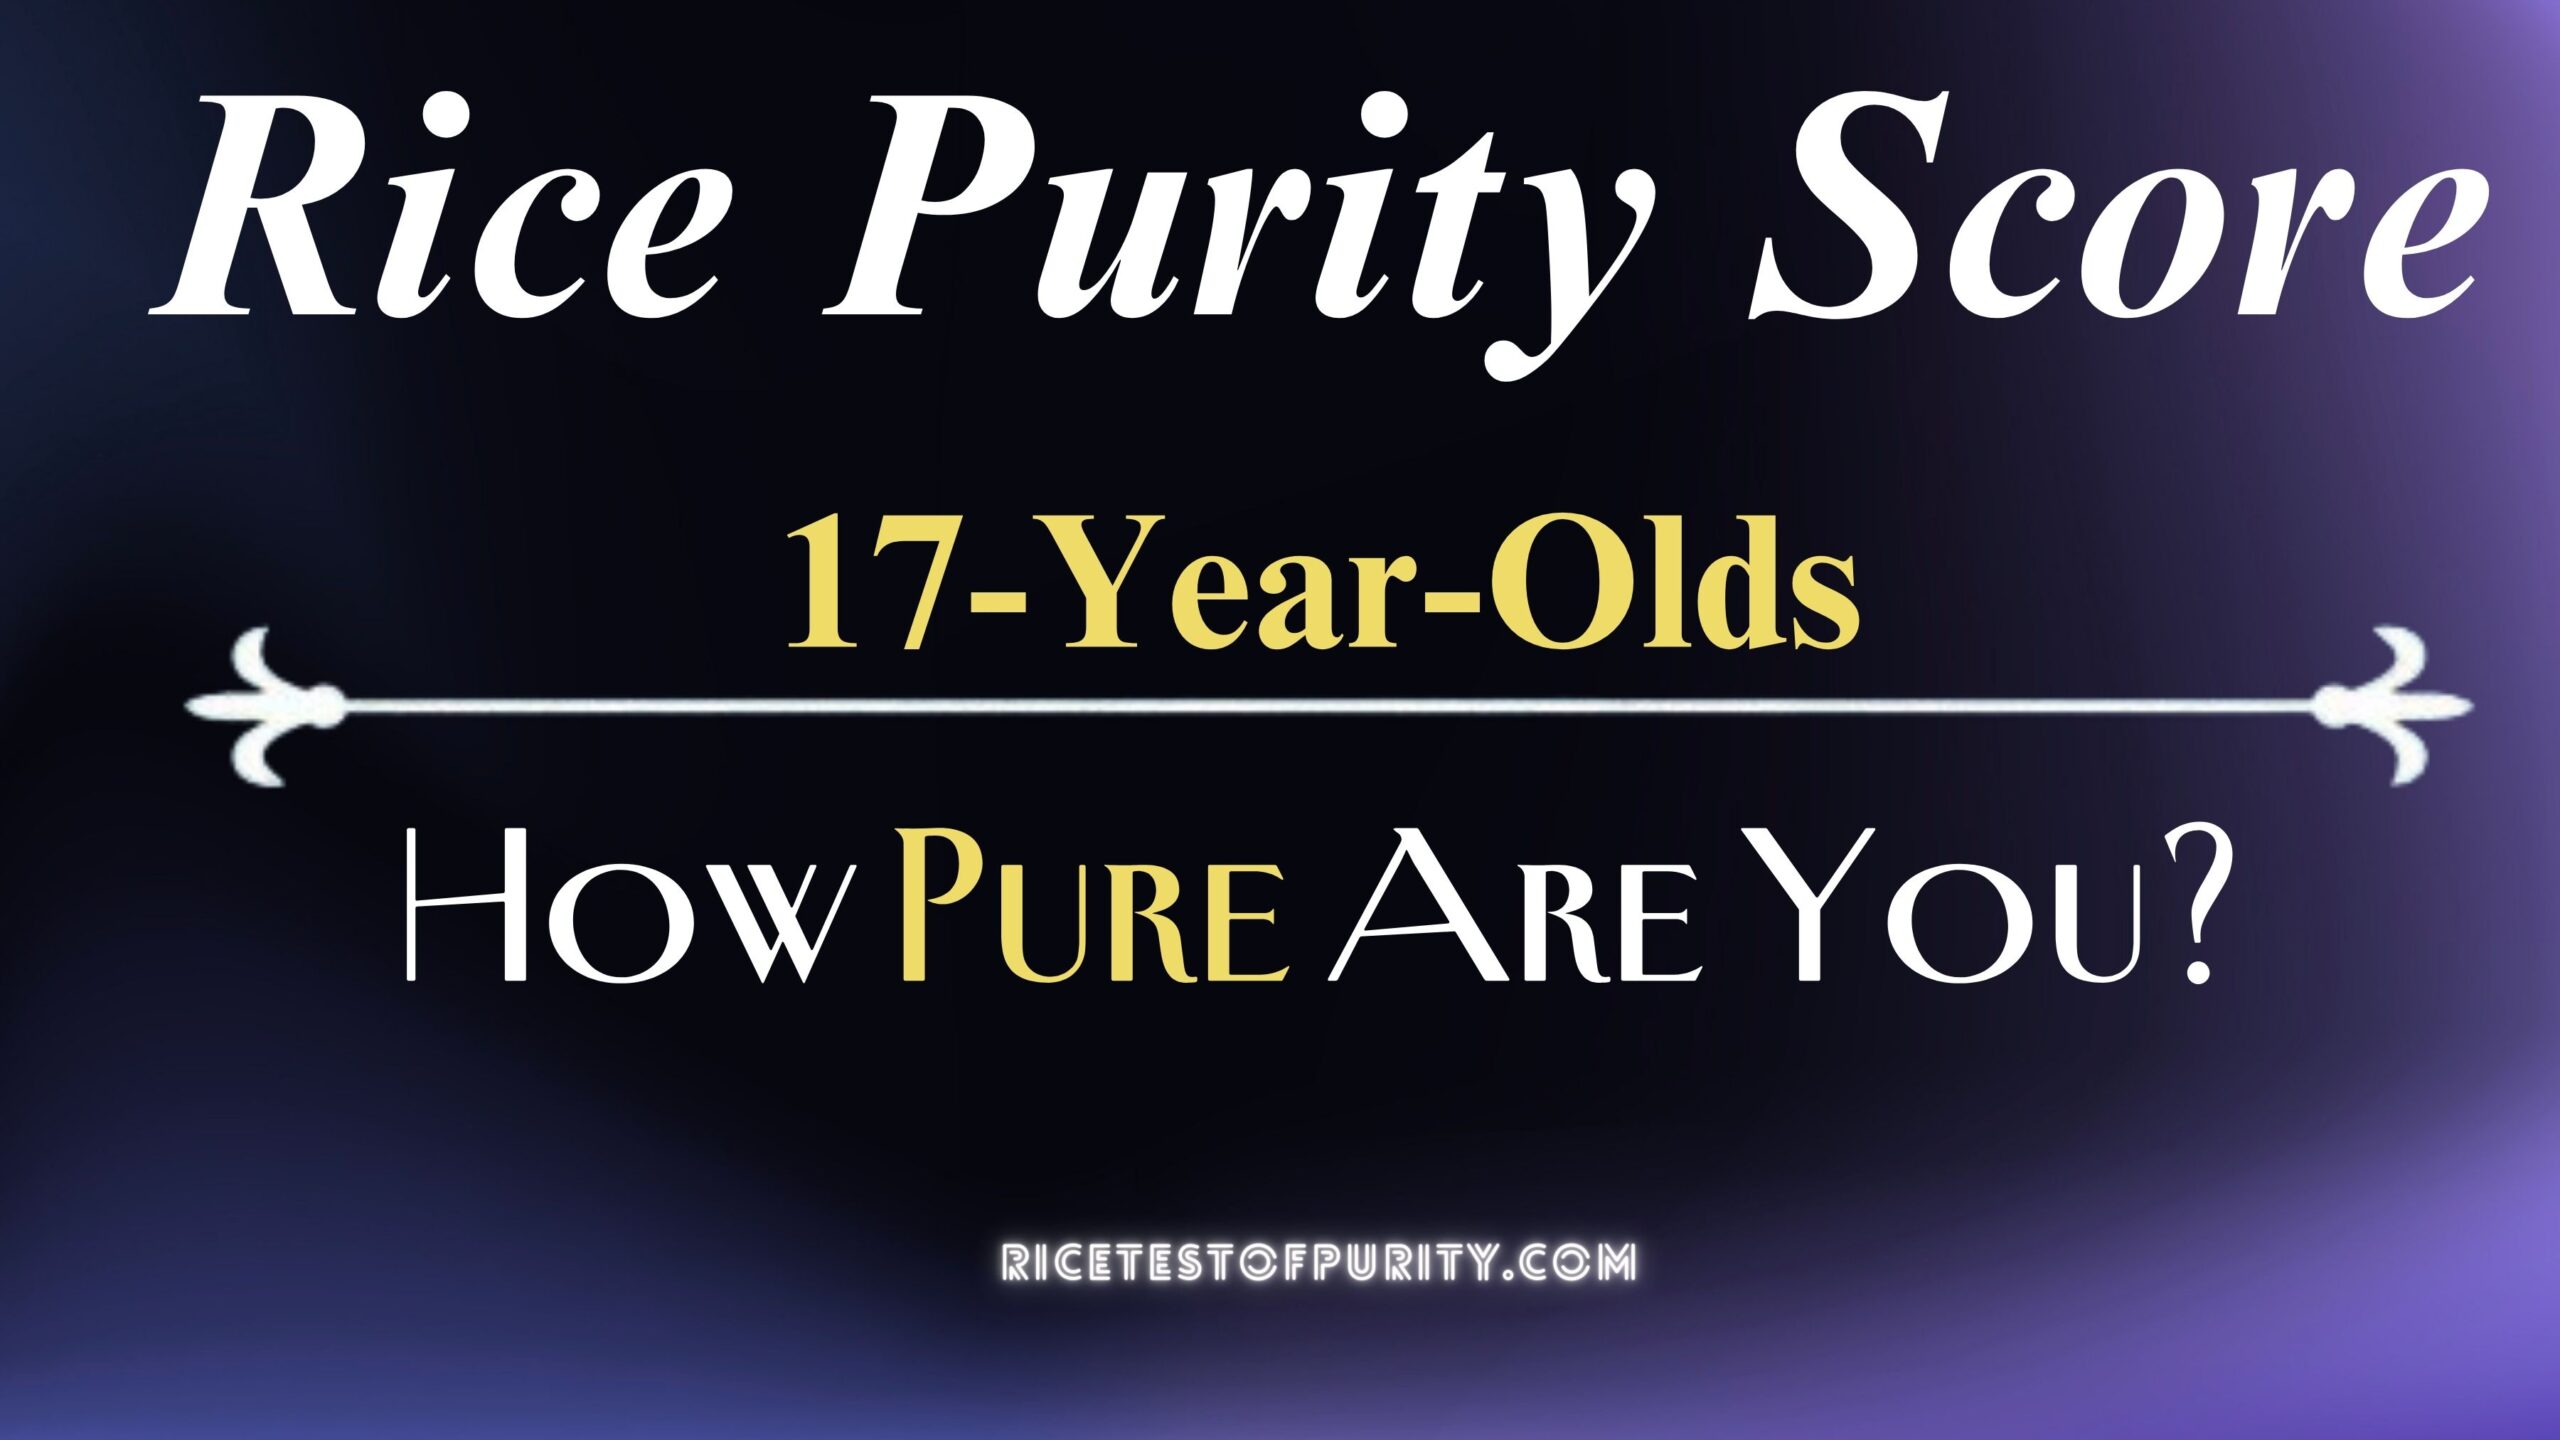 Rice Purity Score for 17-Year-Olds